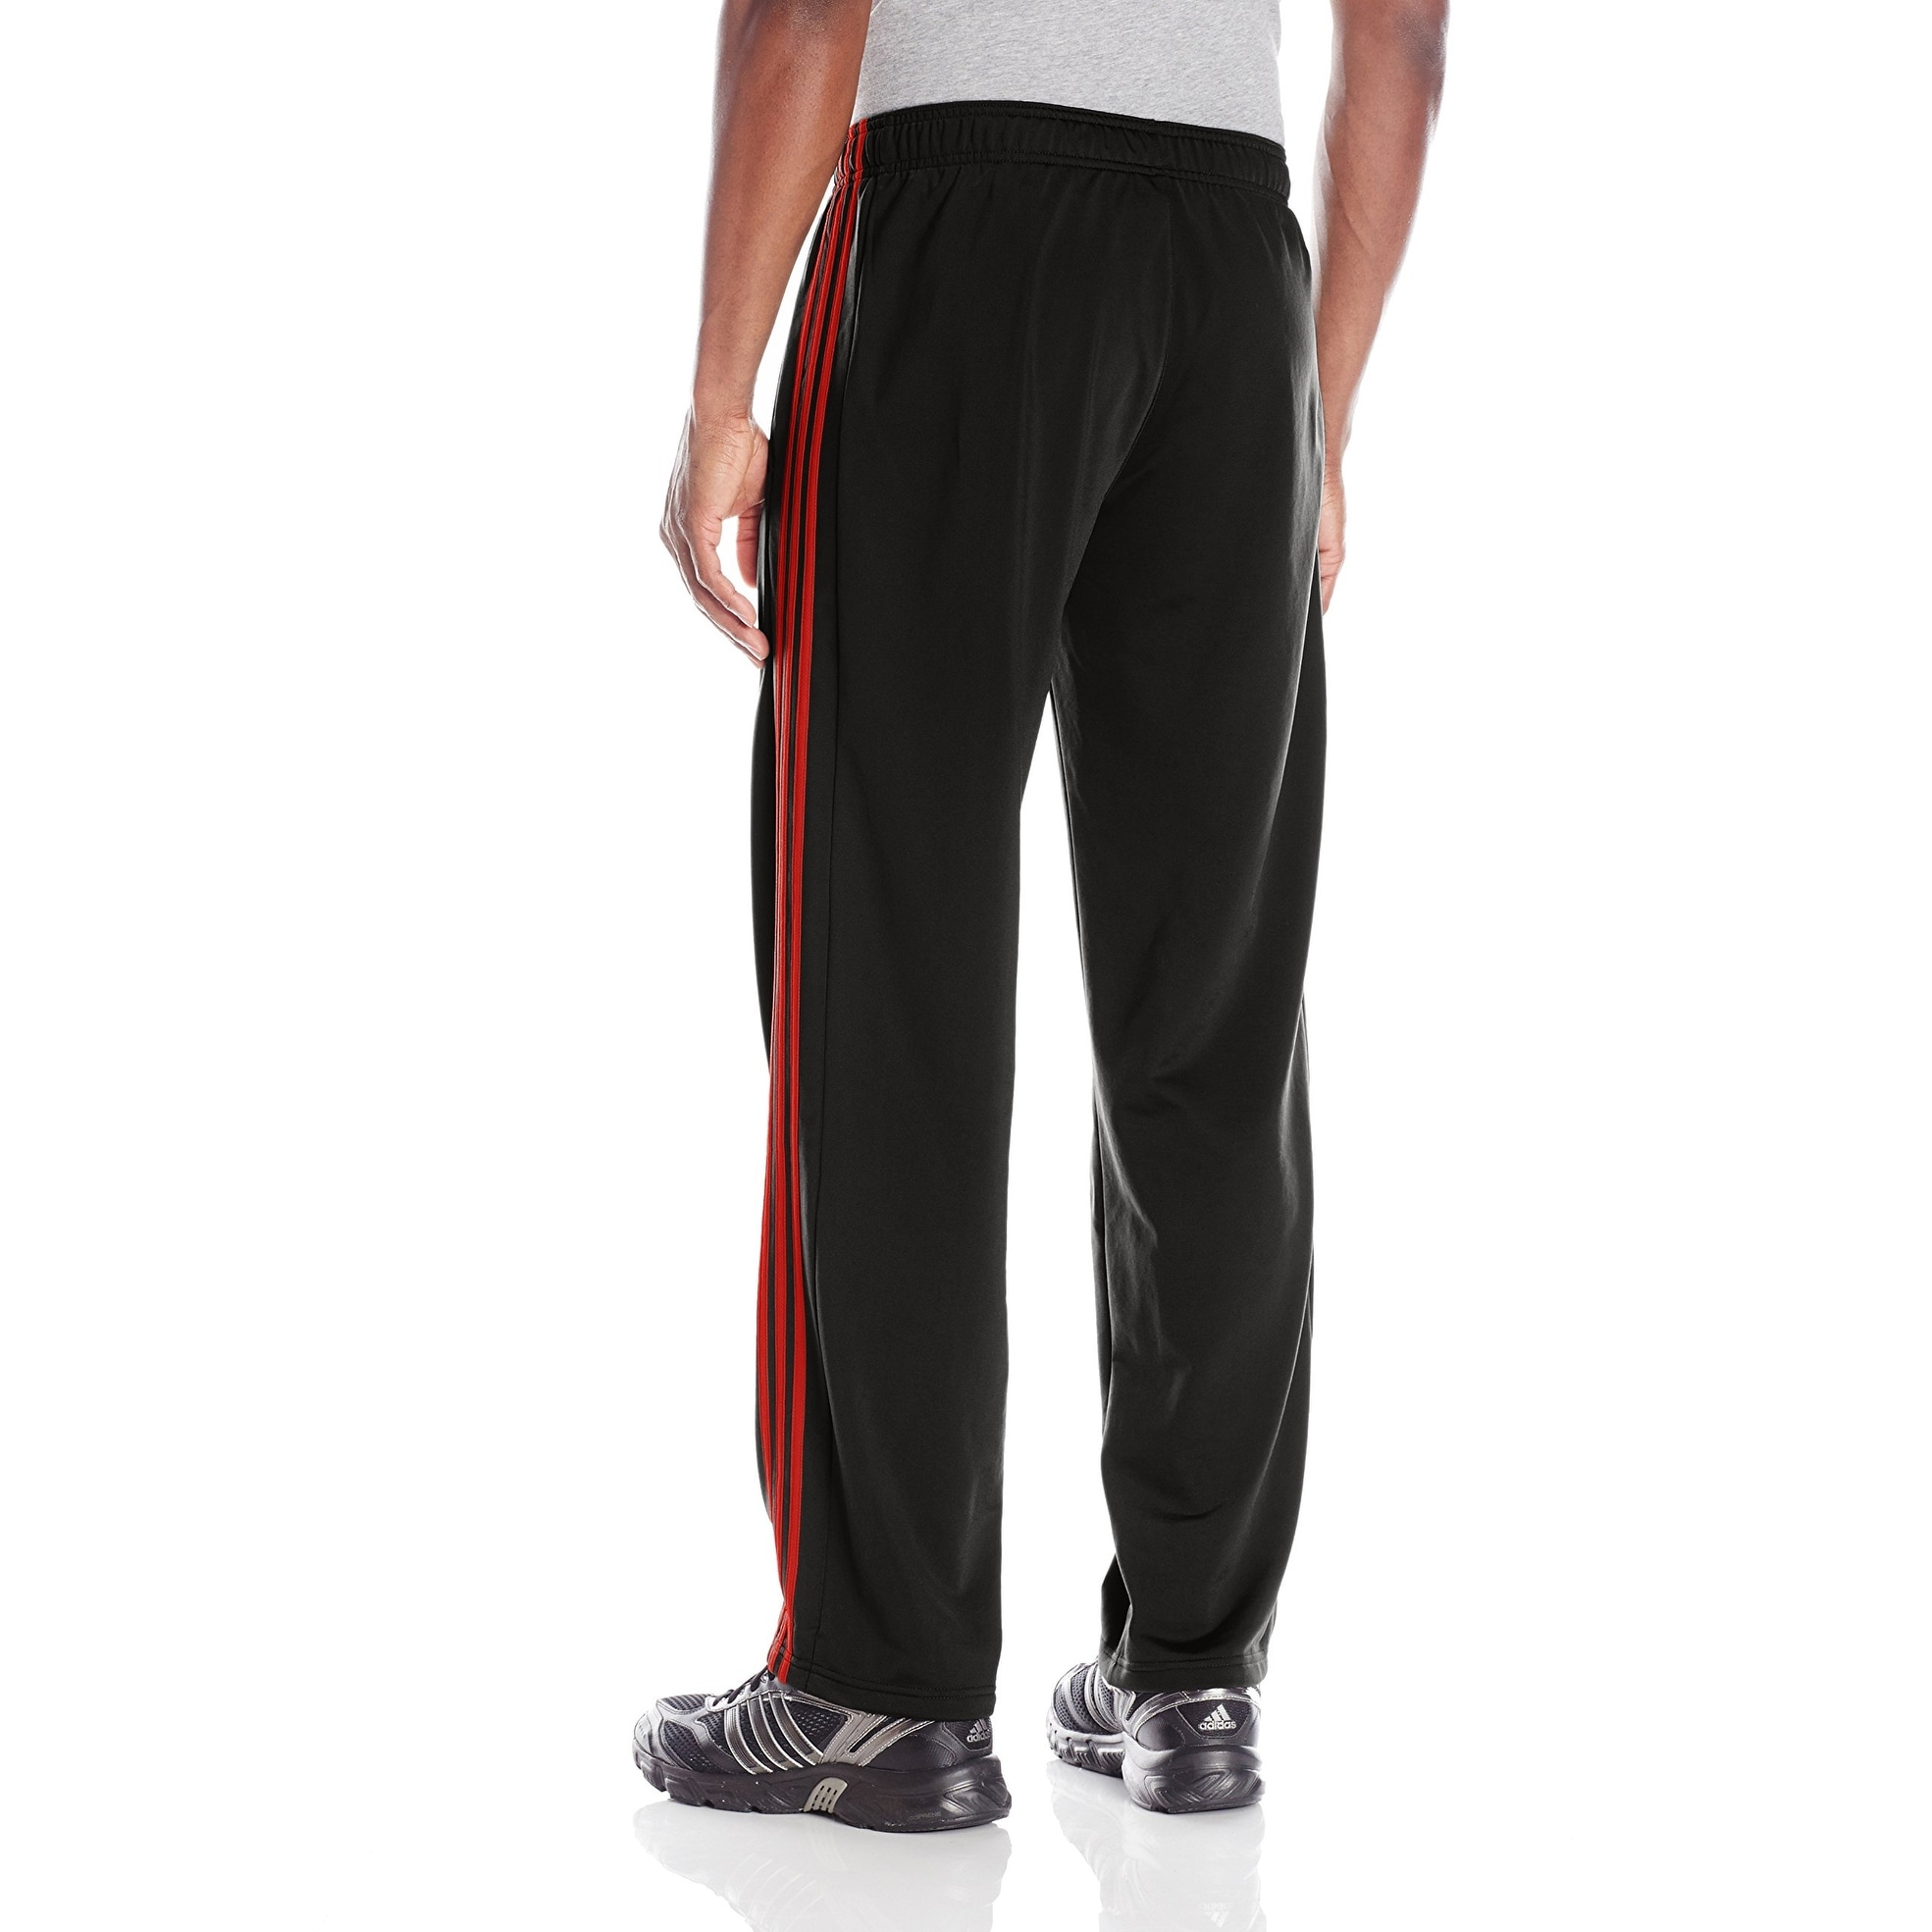 adidas black pants with red stripes